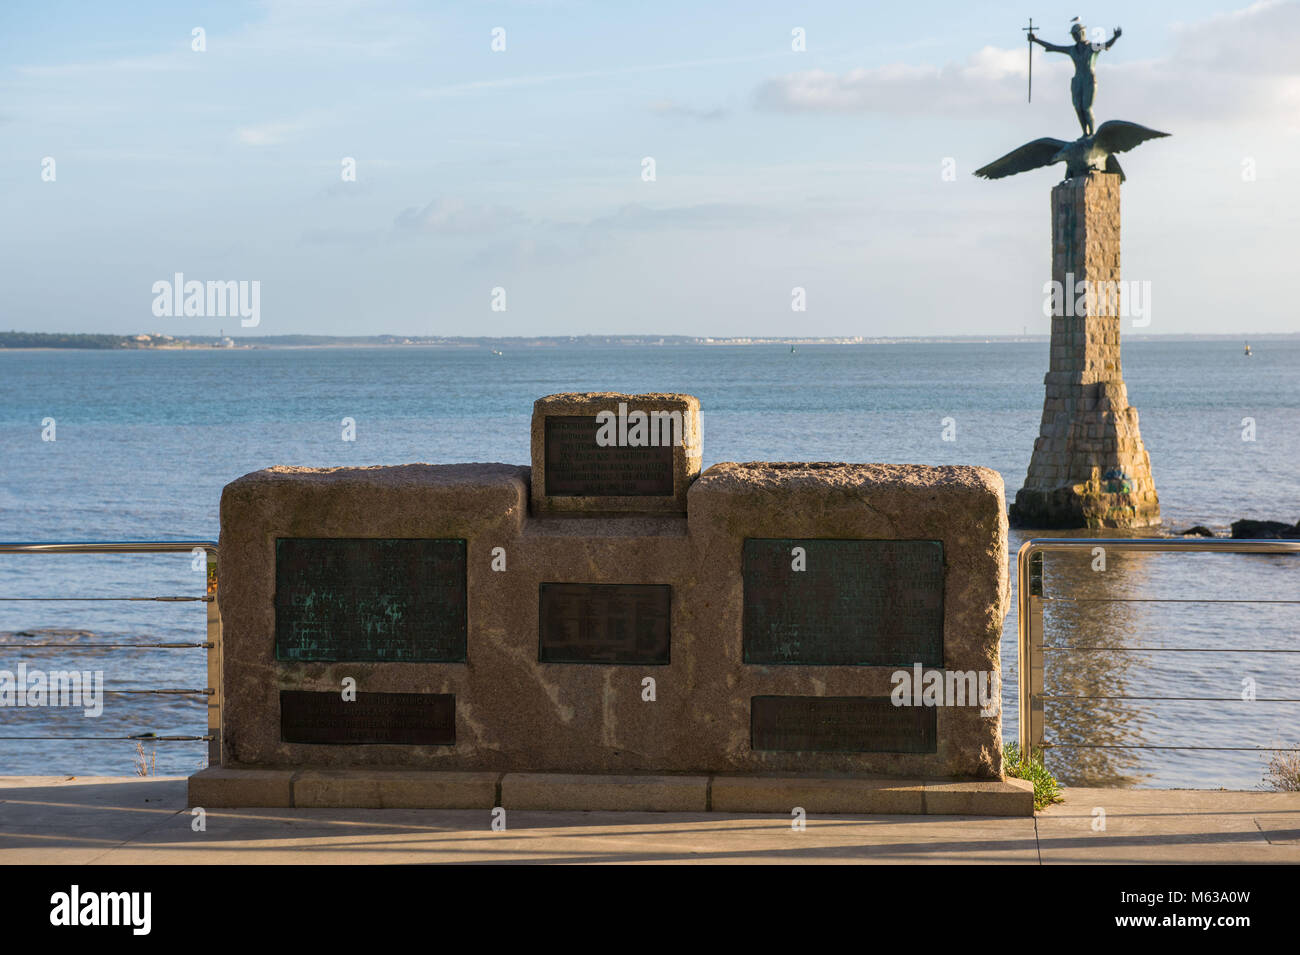 Saint Nazaire, monument in memory of the Americans liberation from the Nazi occupation. France. Stock Photo